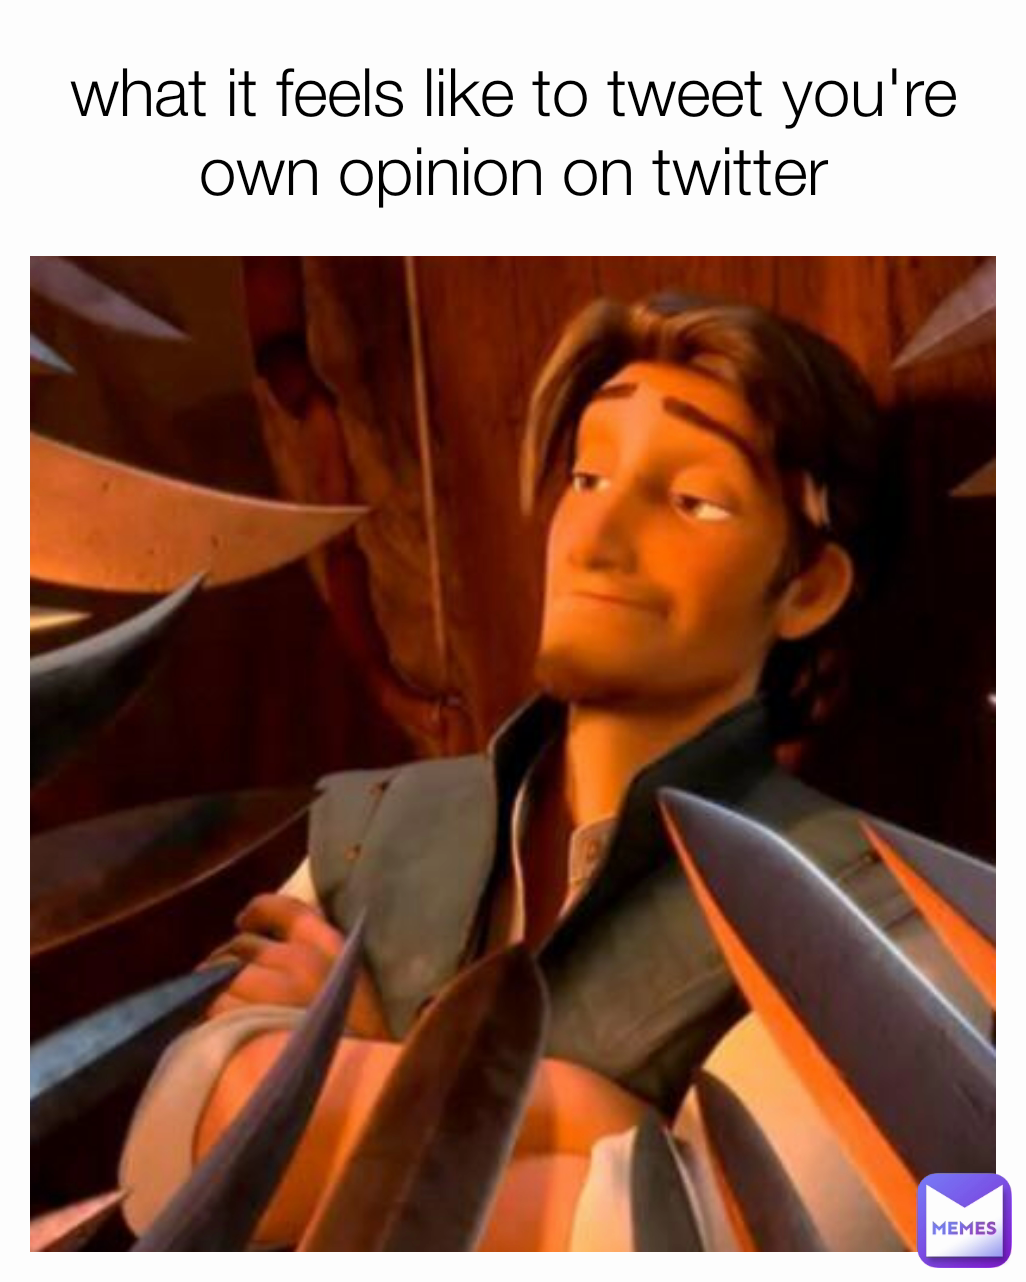 what it feels like to tweet you're own opinion on twitter